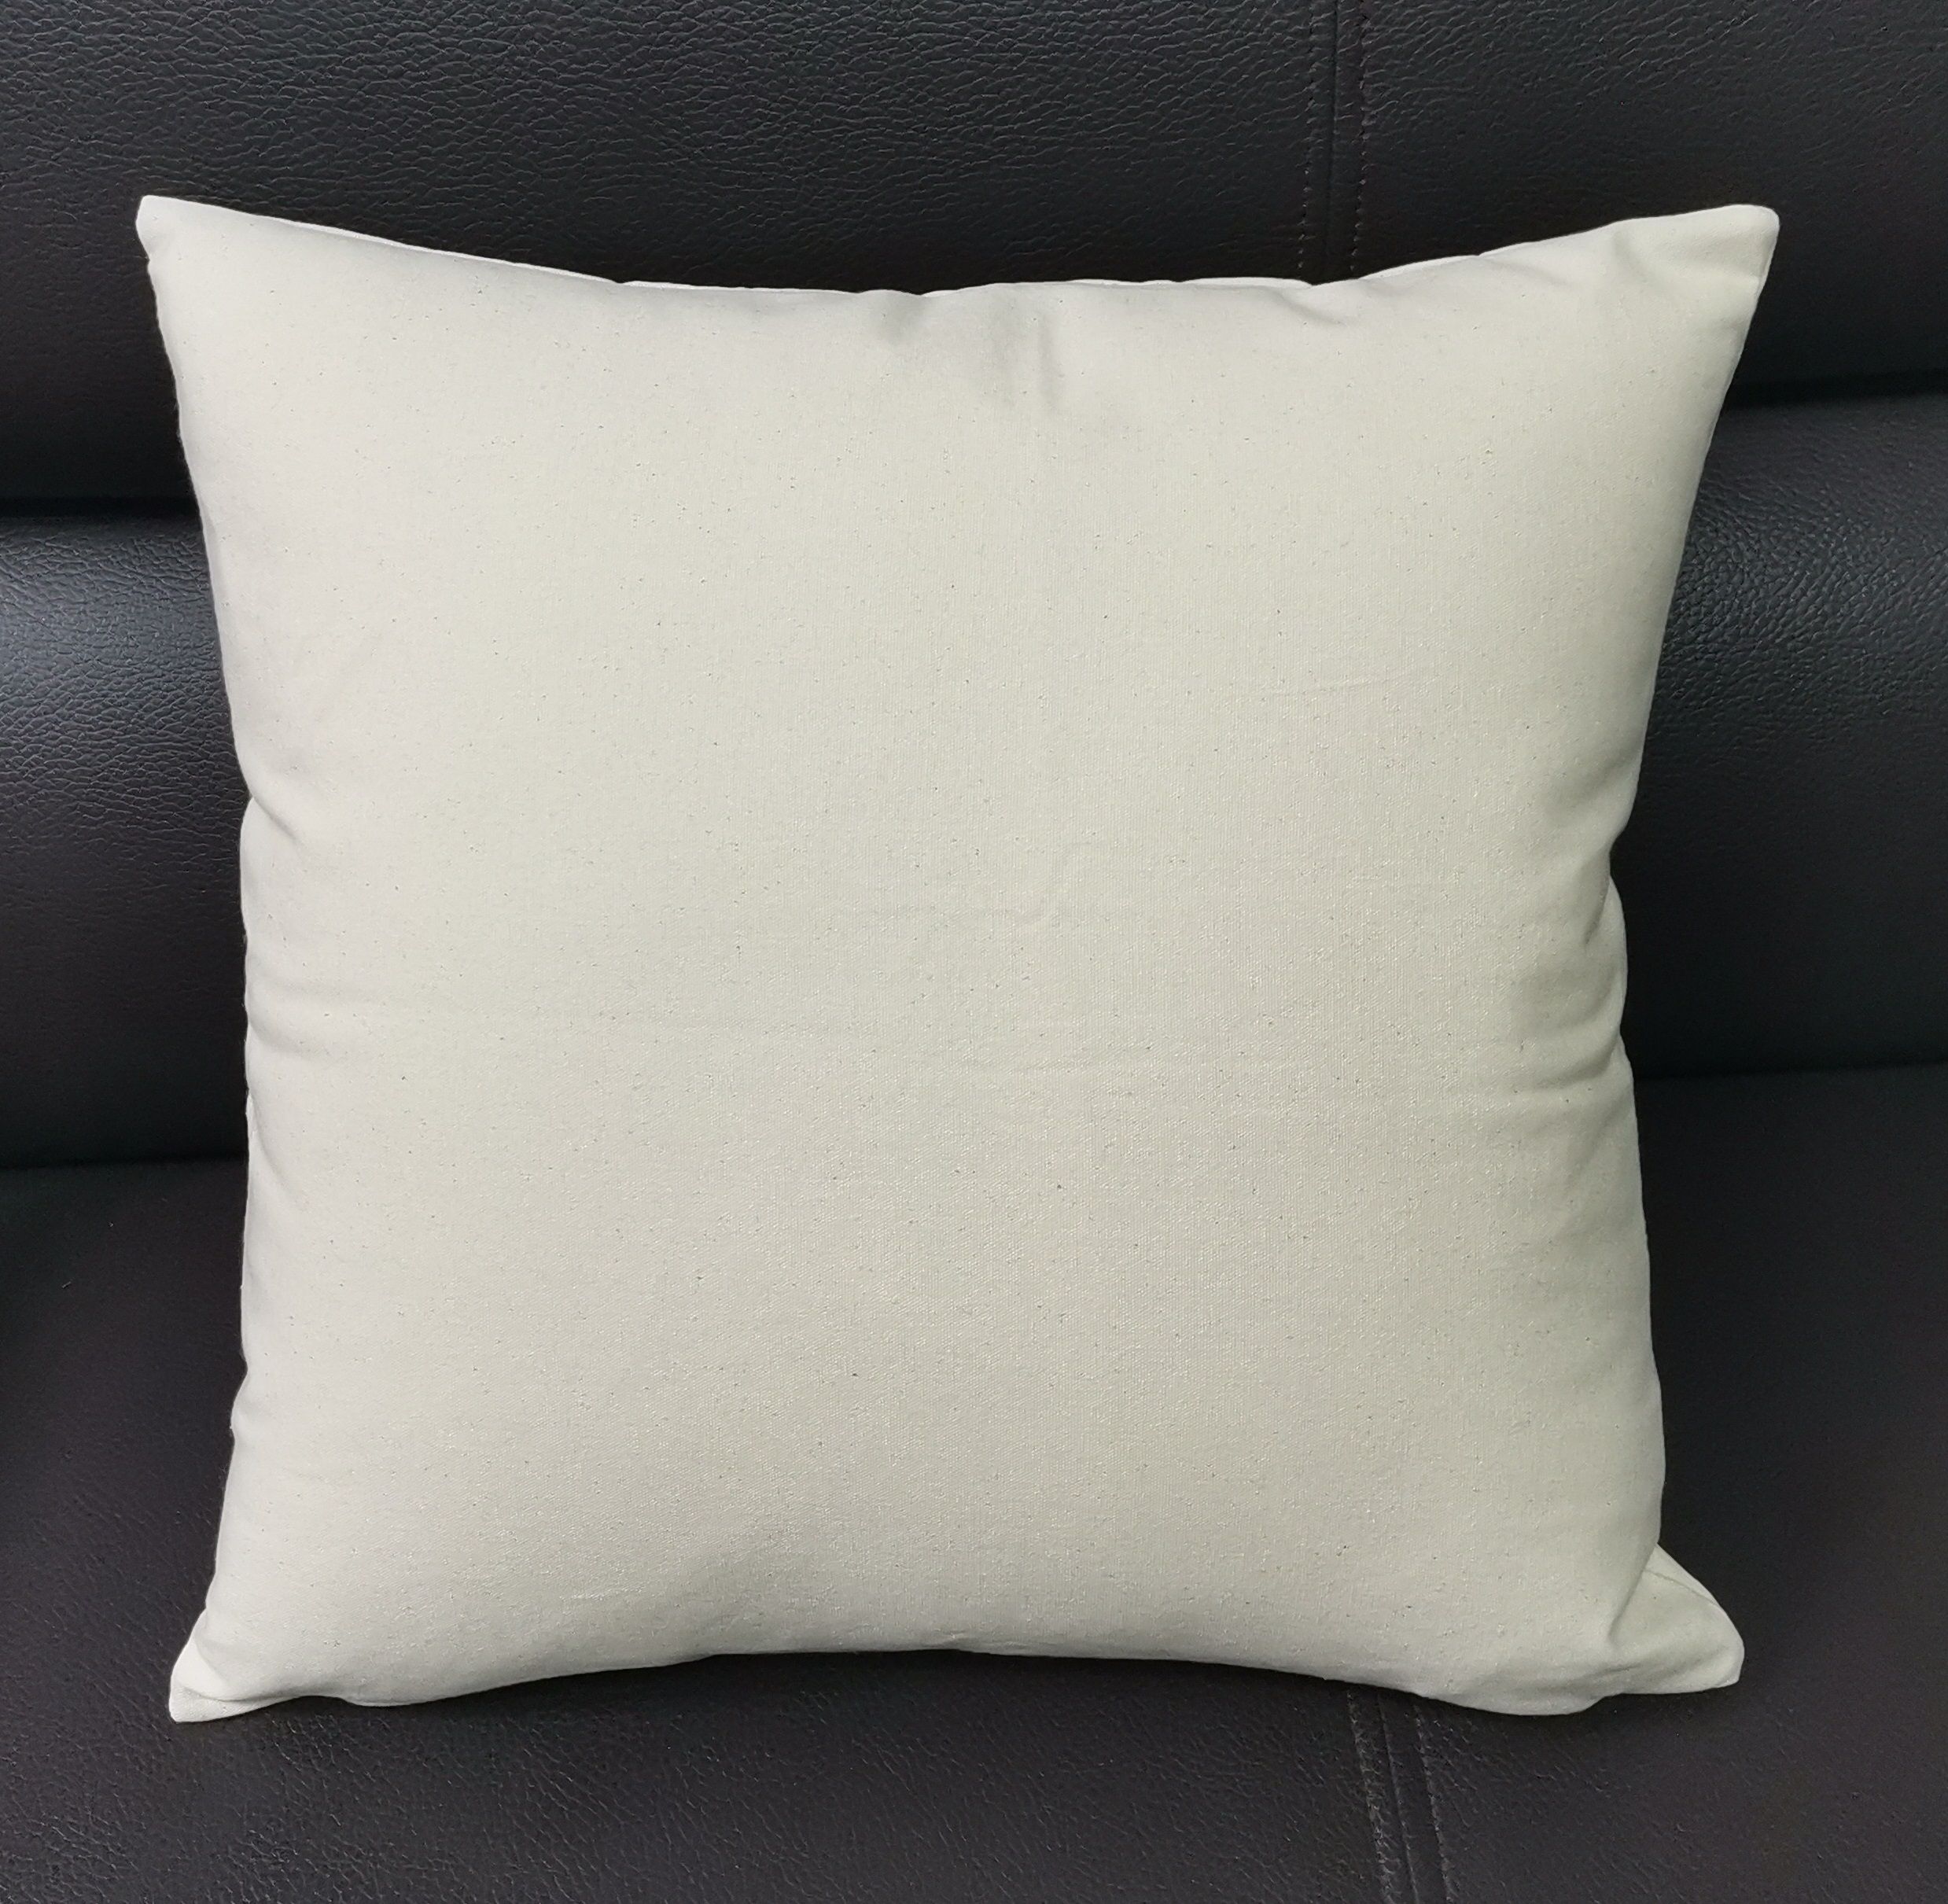 18x18 blank pillow covers